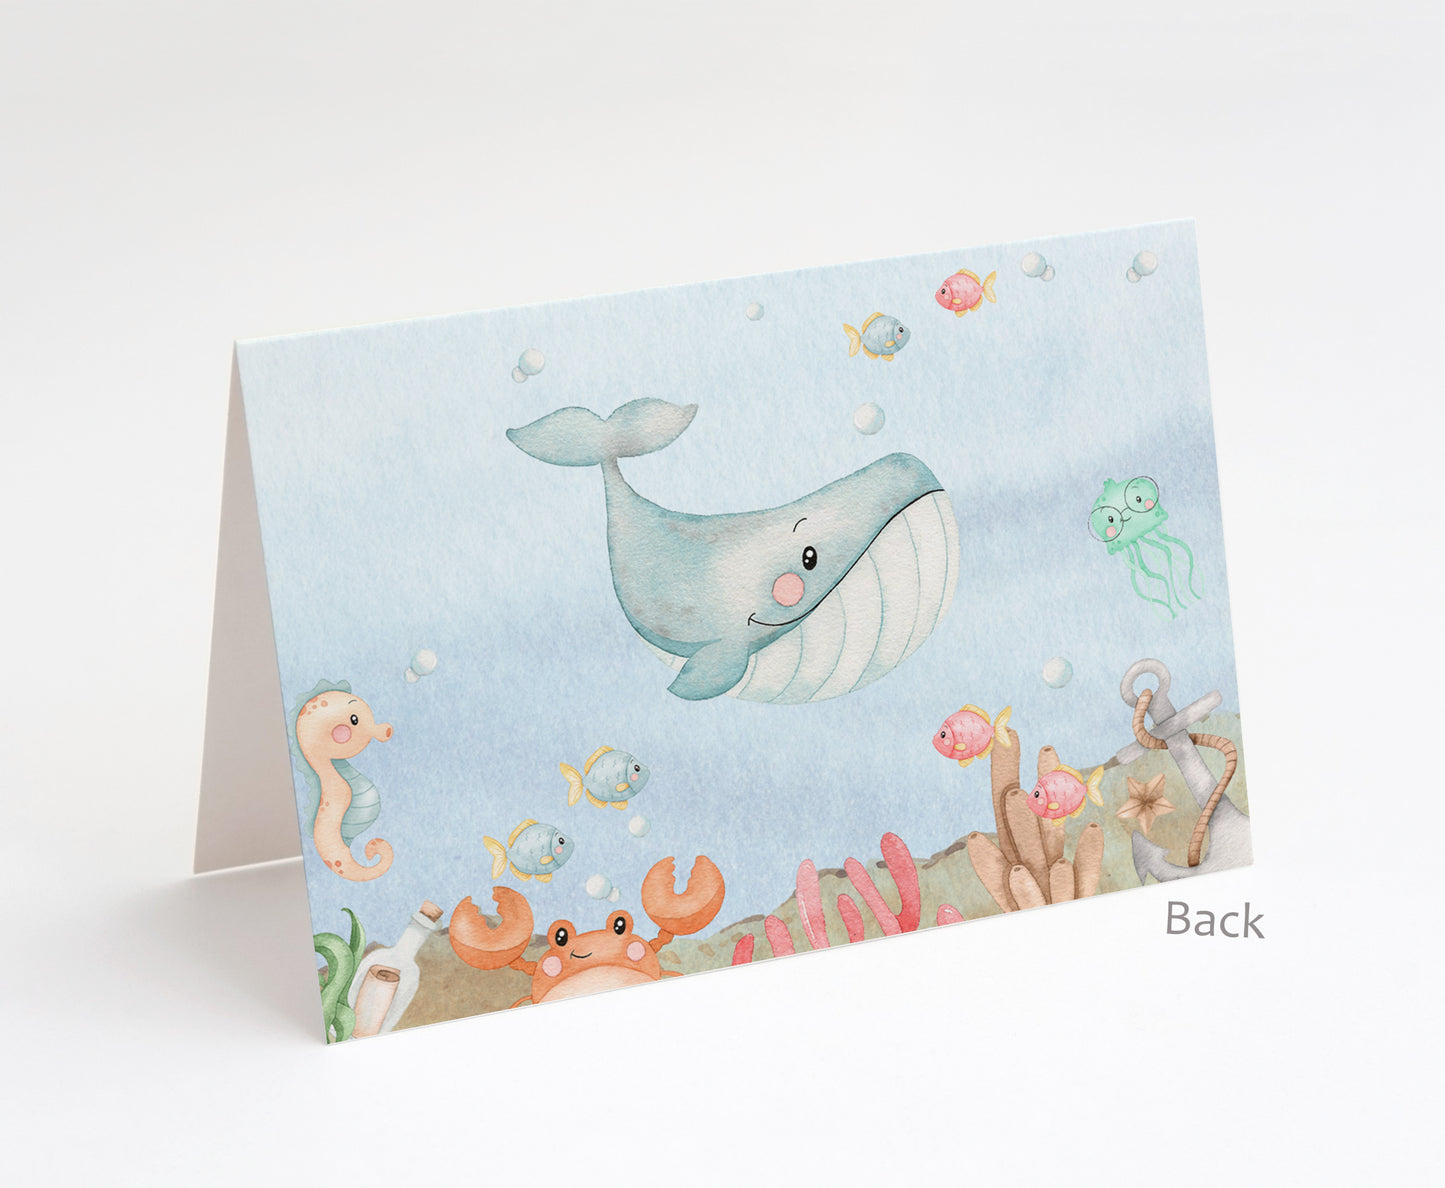 Editable Under The Sea Place Cards | Ocean Theme Party Decorations - 44A